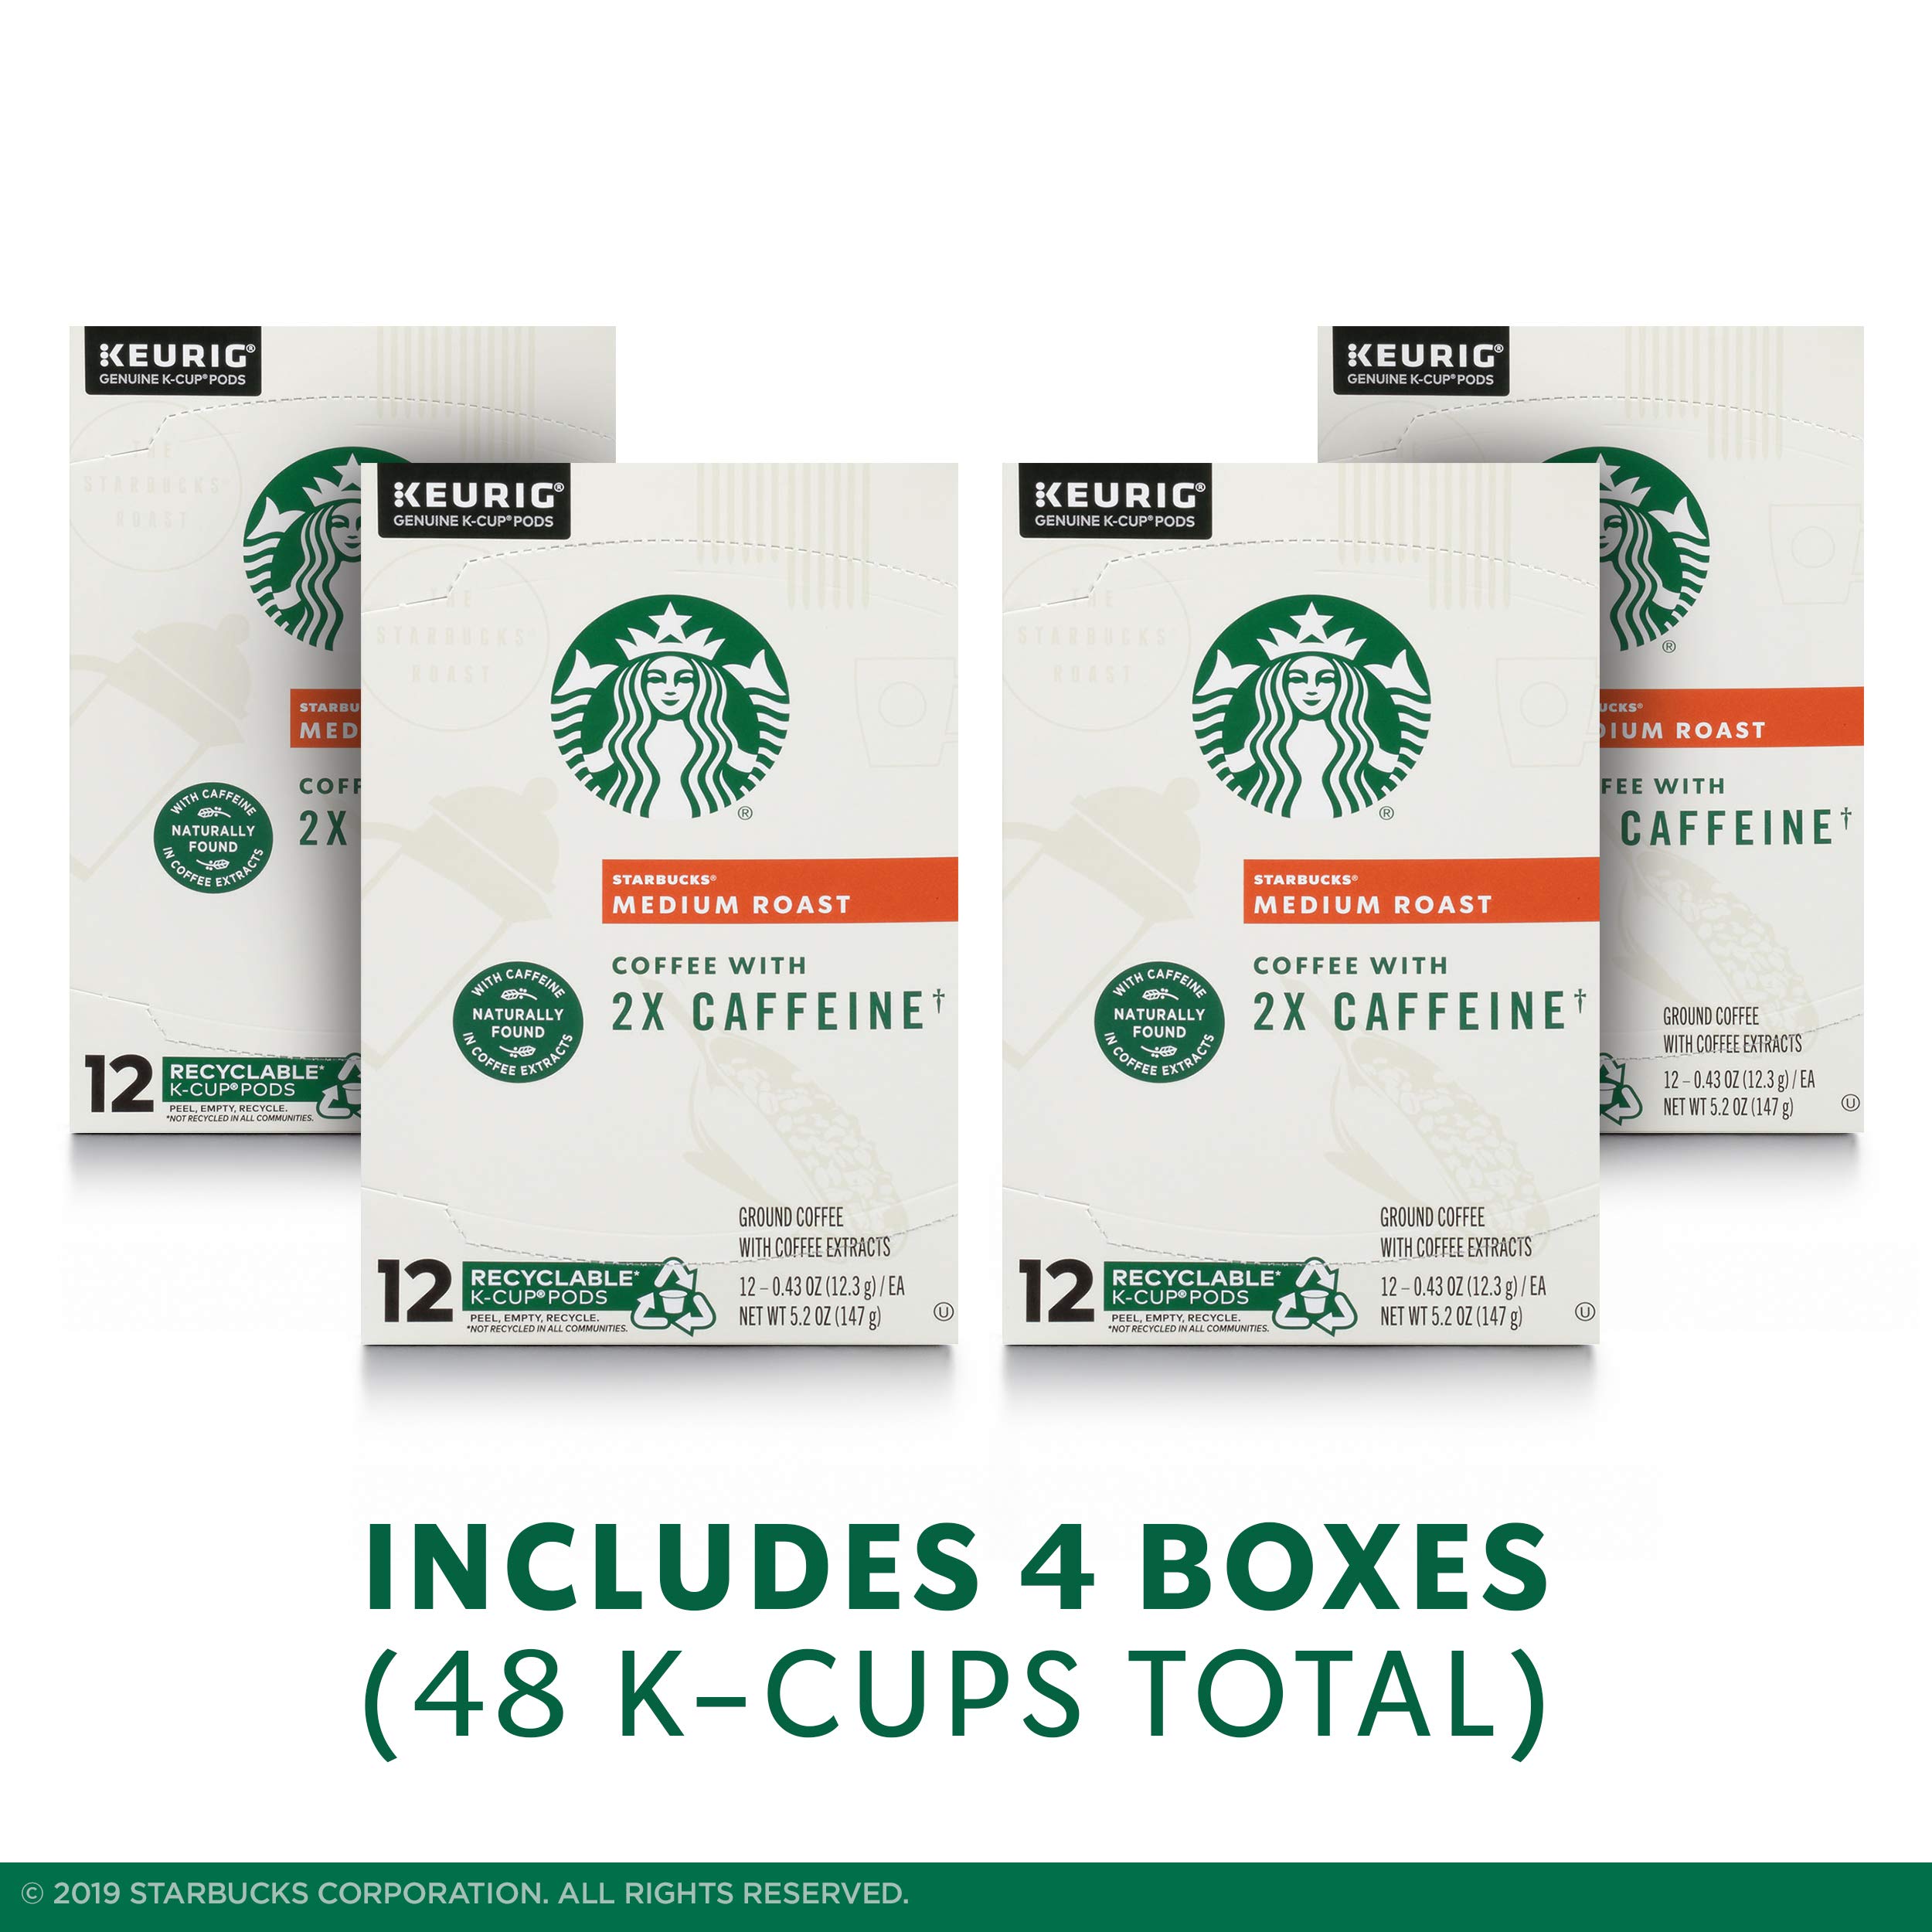 Starbucks Medium Roast K-Cup Coffee Pods with 2X Caffeine, for Keurig Brewers, 4 boxes (48 pods total)